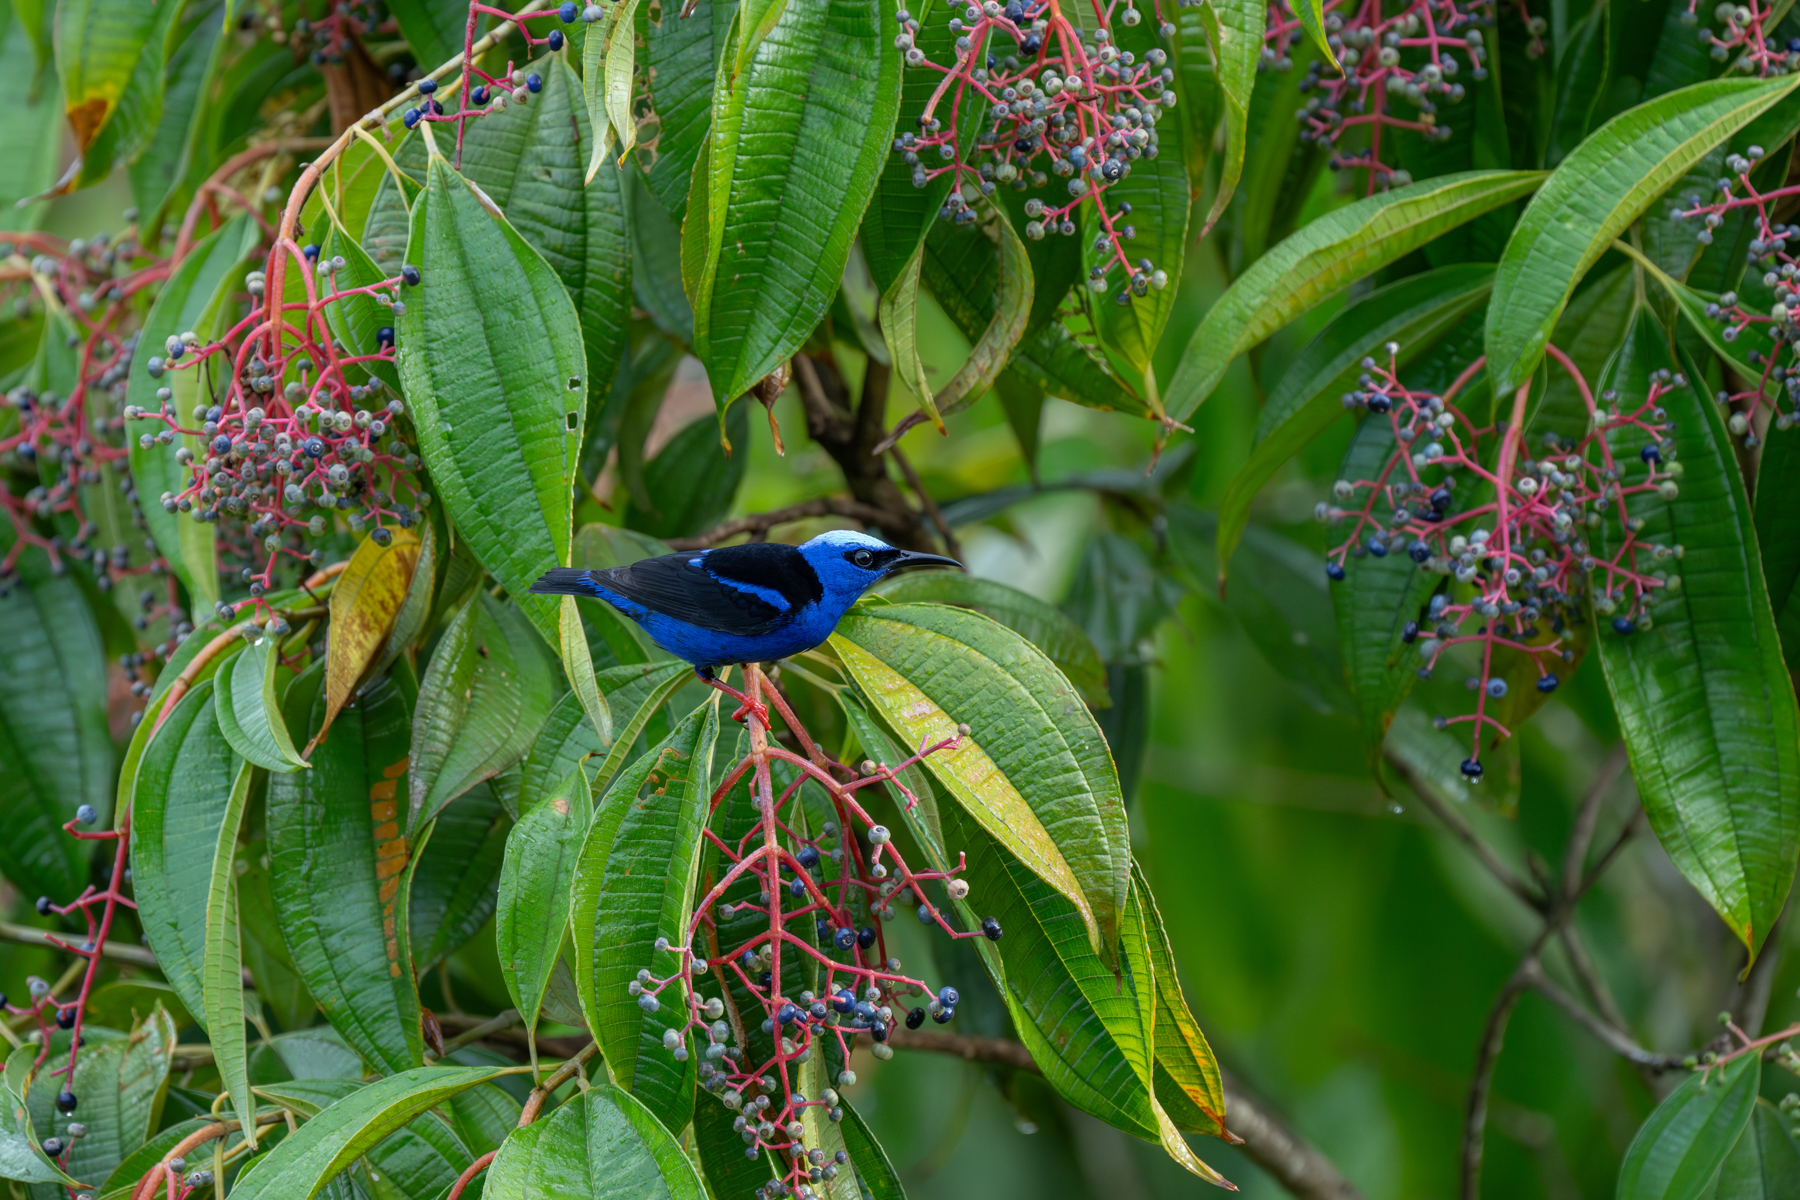 A beautiful Red-legged Honeycreeper searches for berries (image by Inger Vandyke)